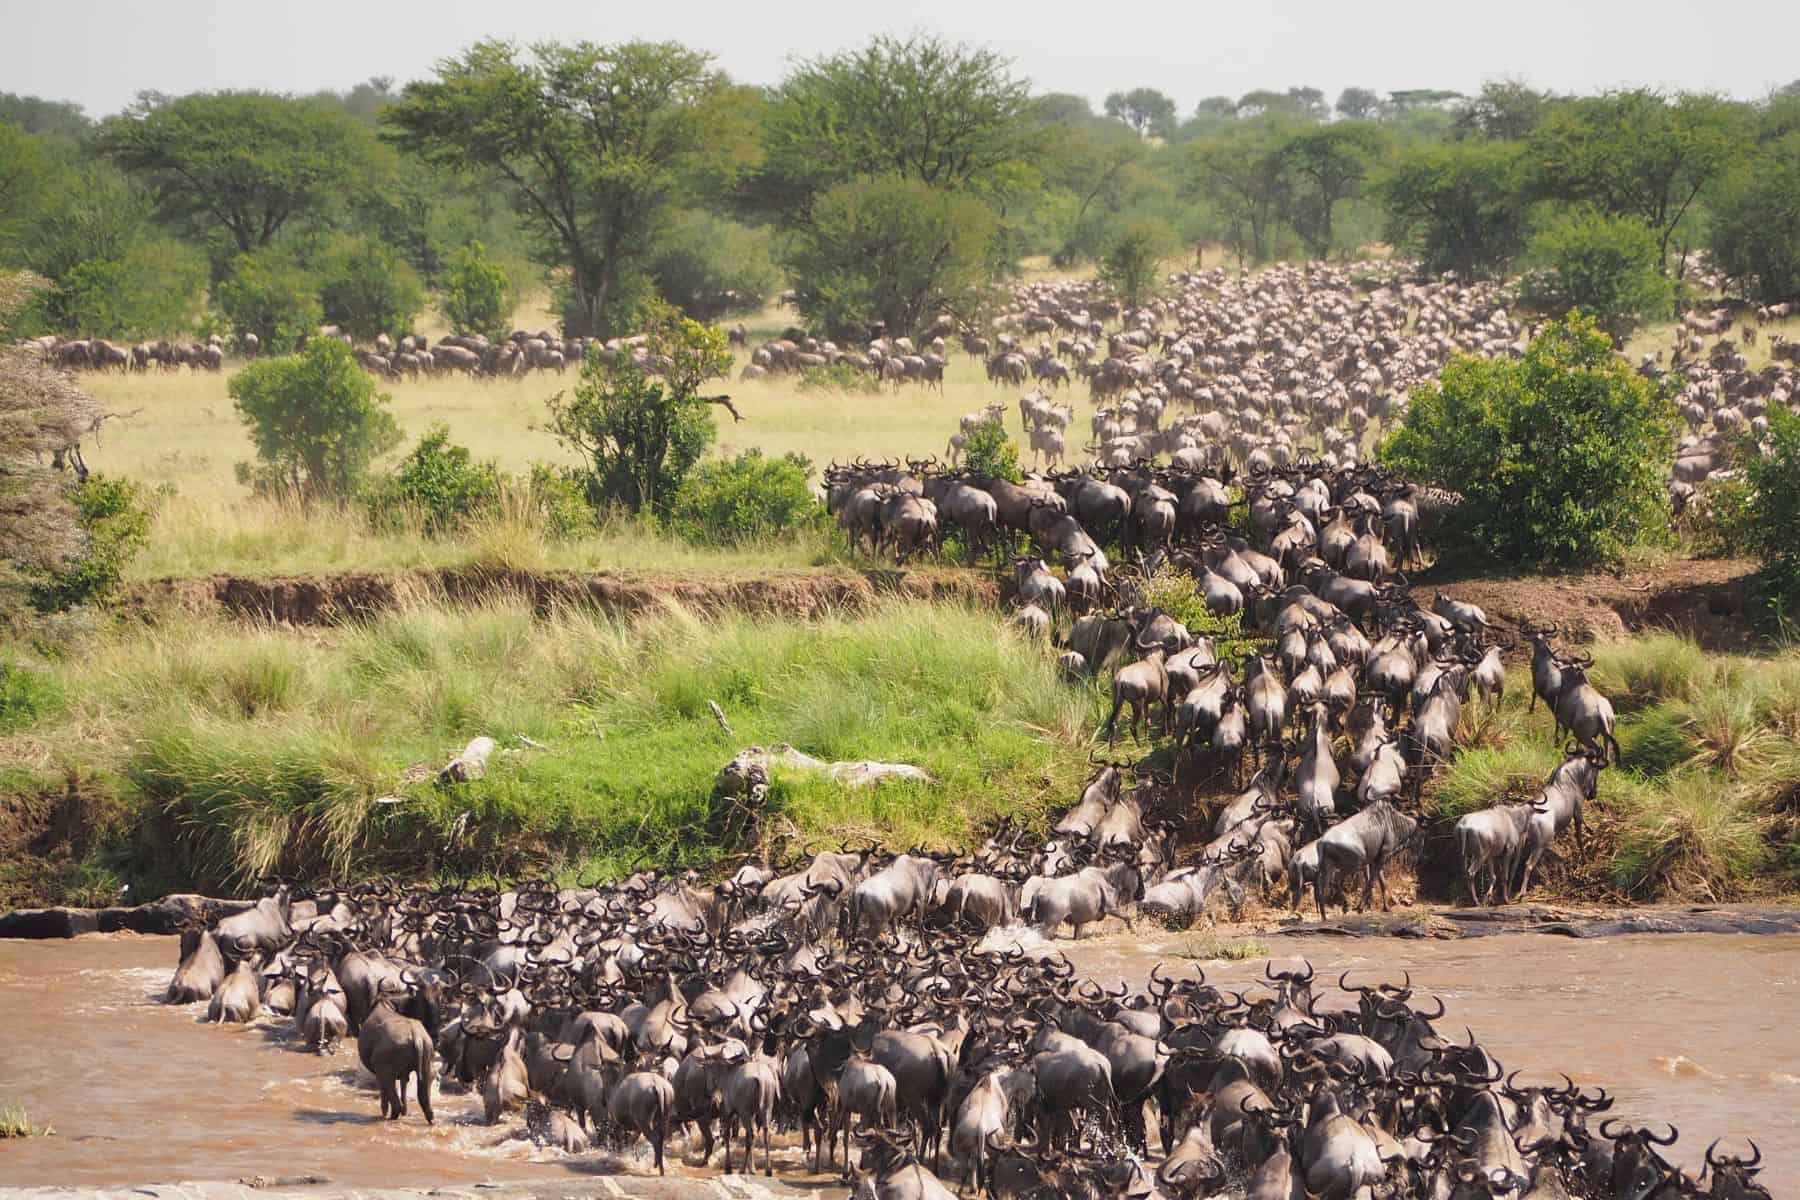 A huge herd of wildebeest during the Great Migration, seen on safari in the Serengeti